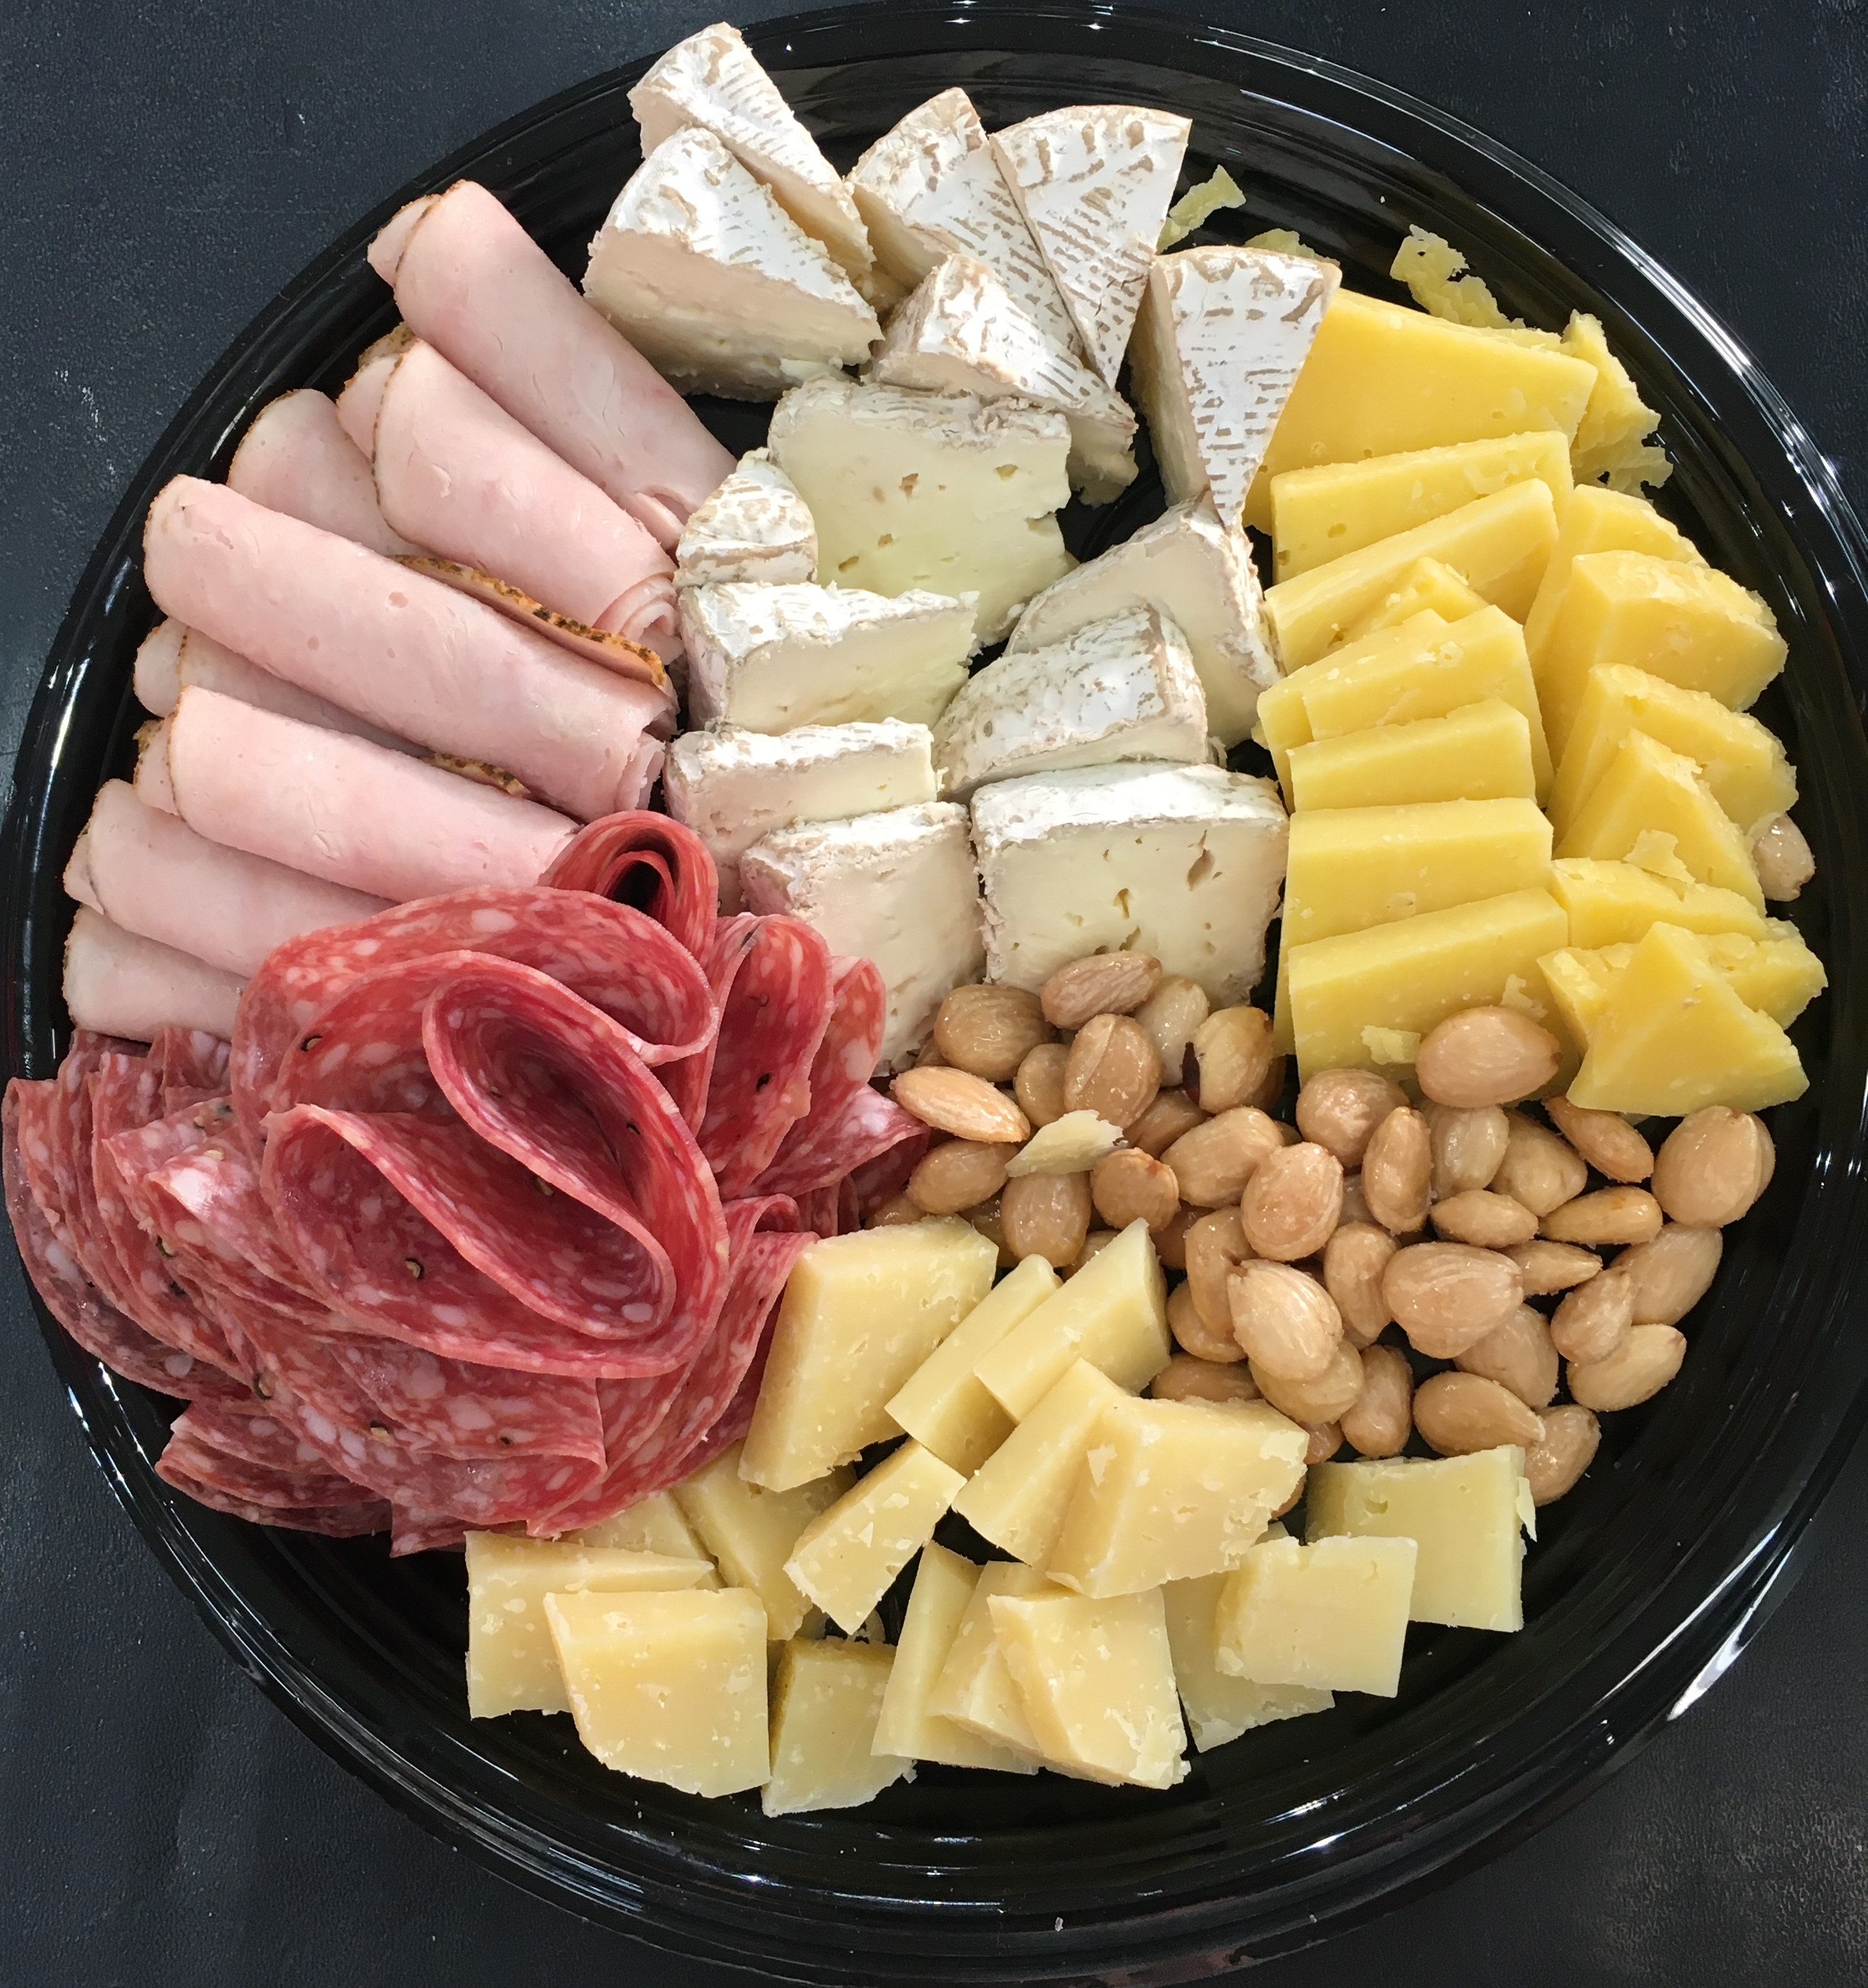 Easy Meat and Cheese Tray Ideas From Cal Mart